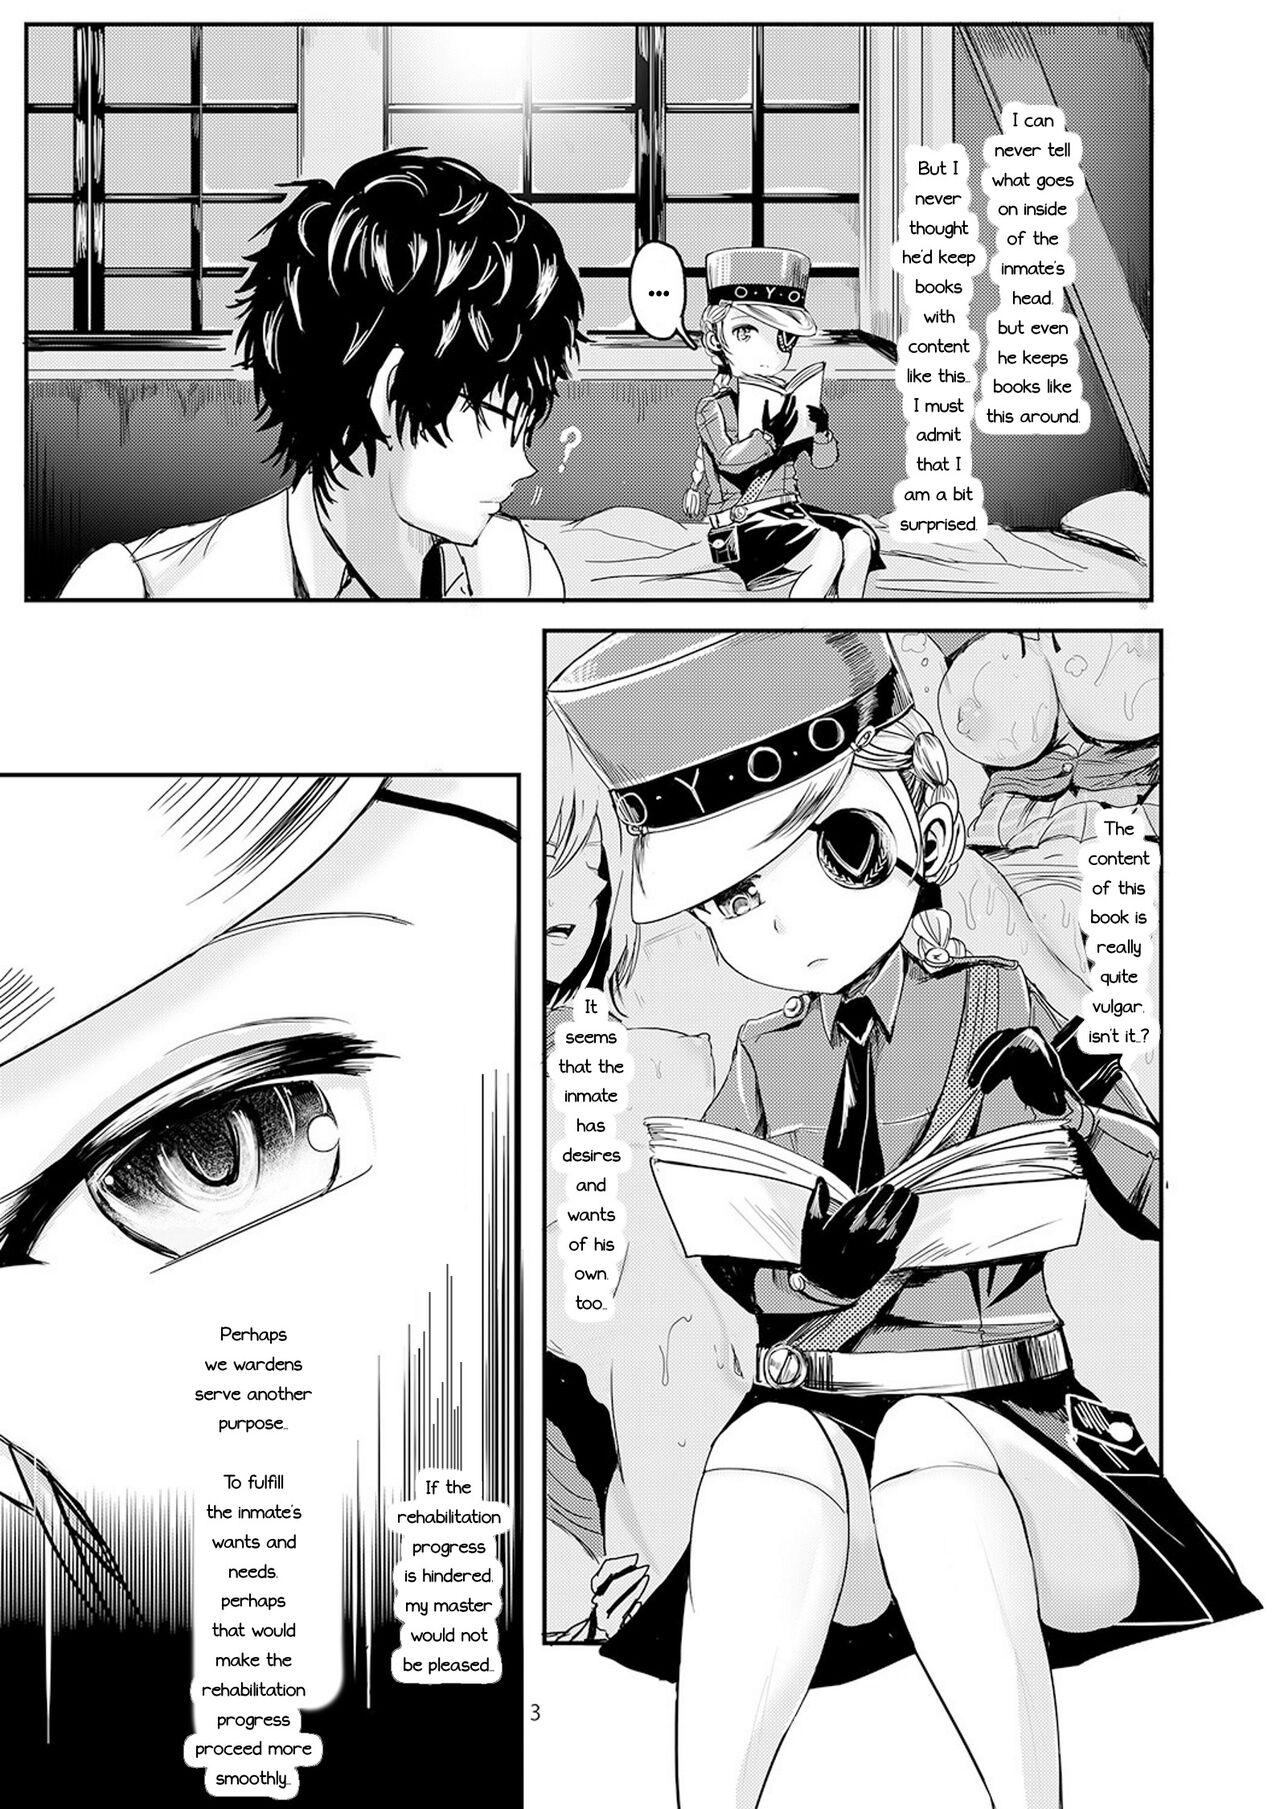 Amature Justing - Persona 5 Eurosex - Page 4